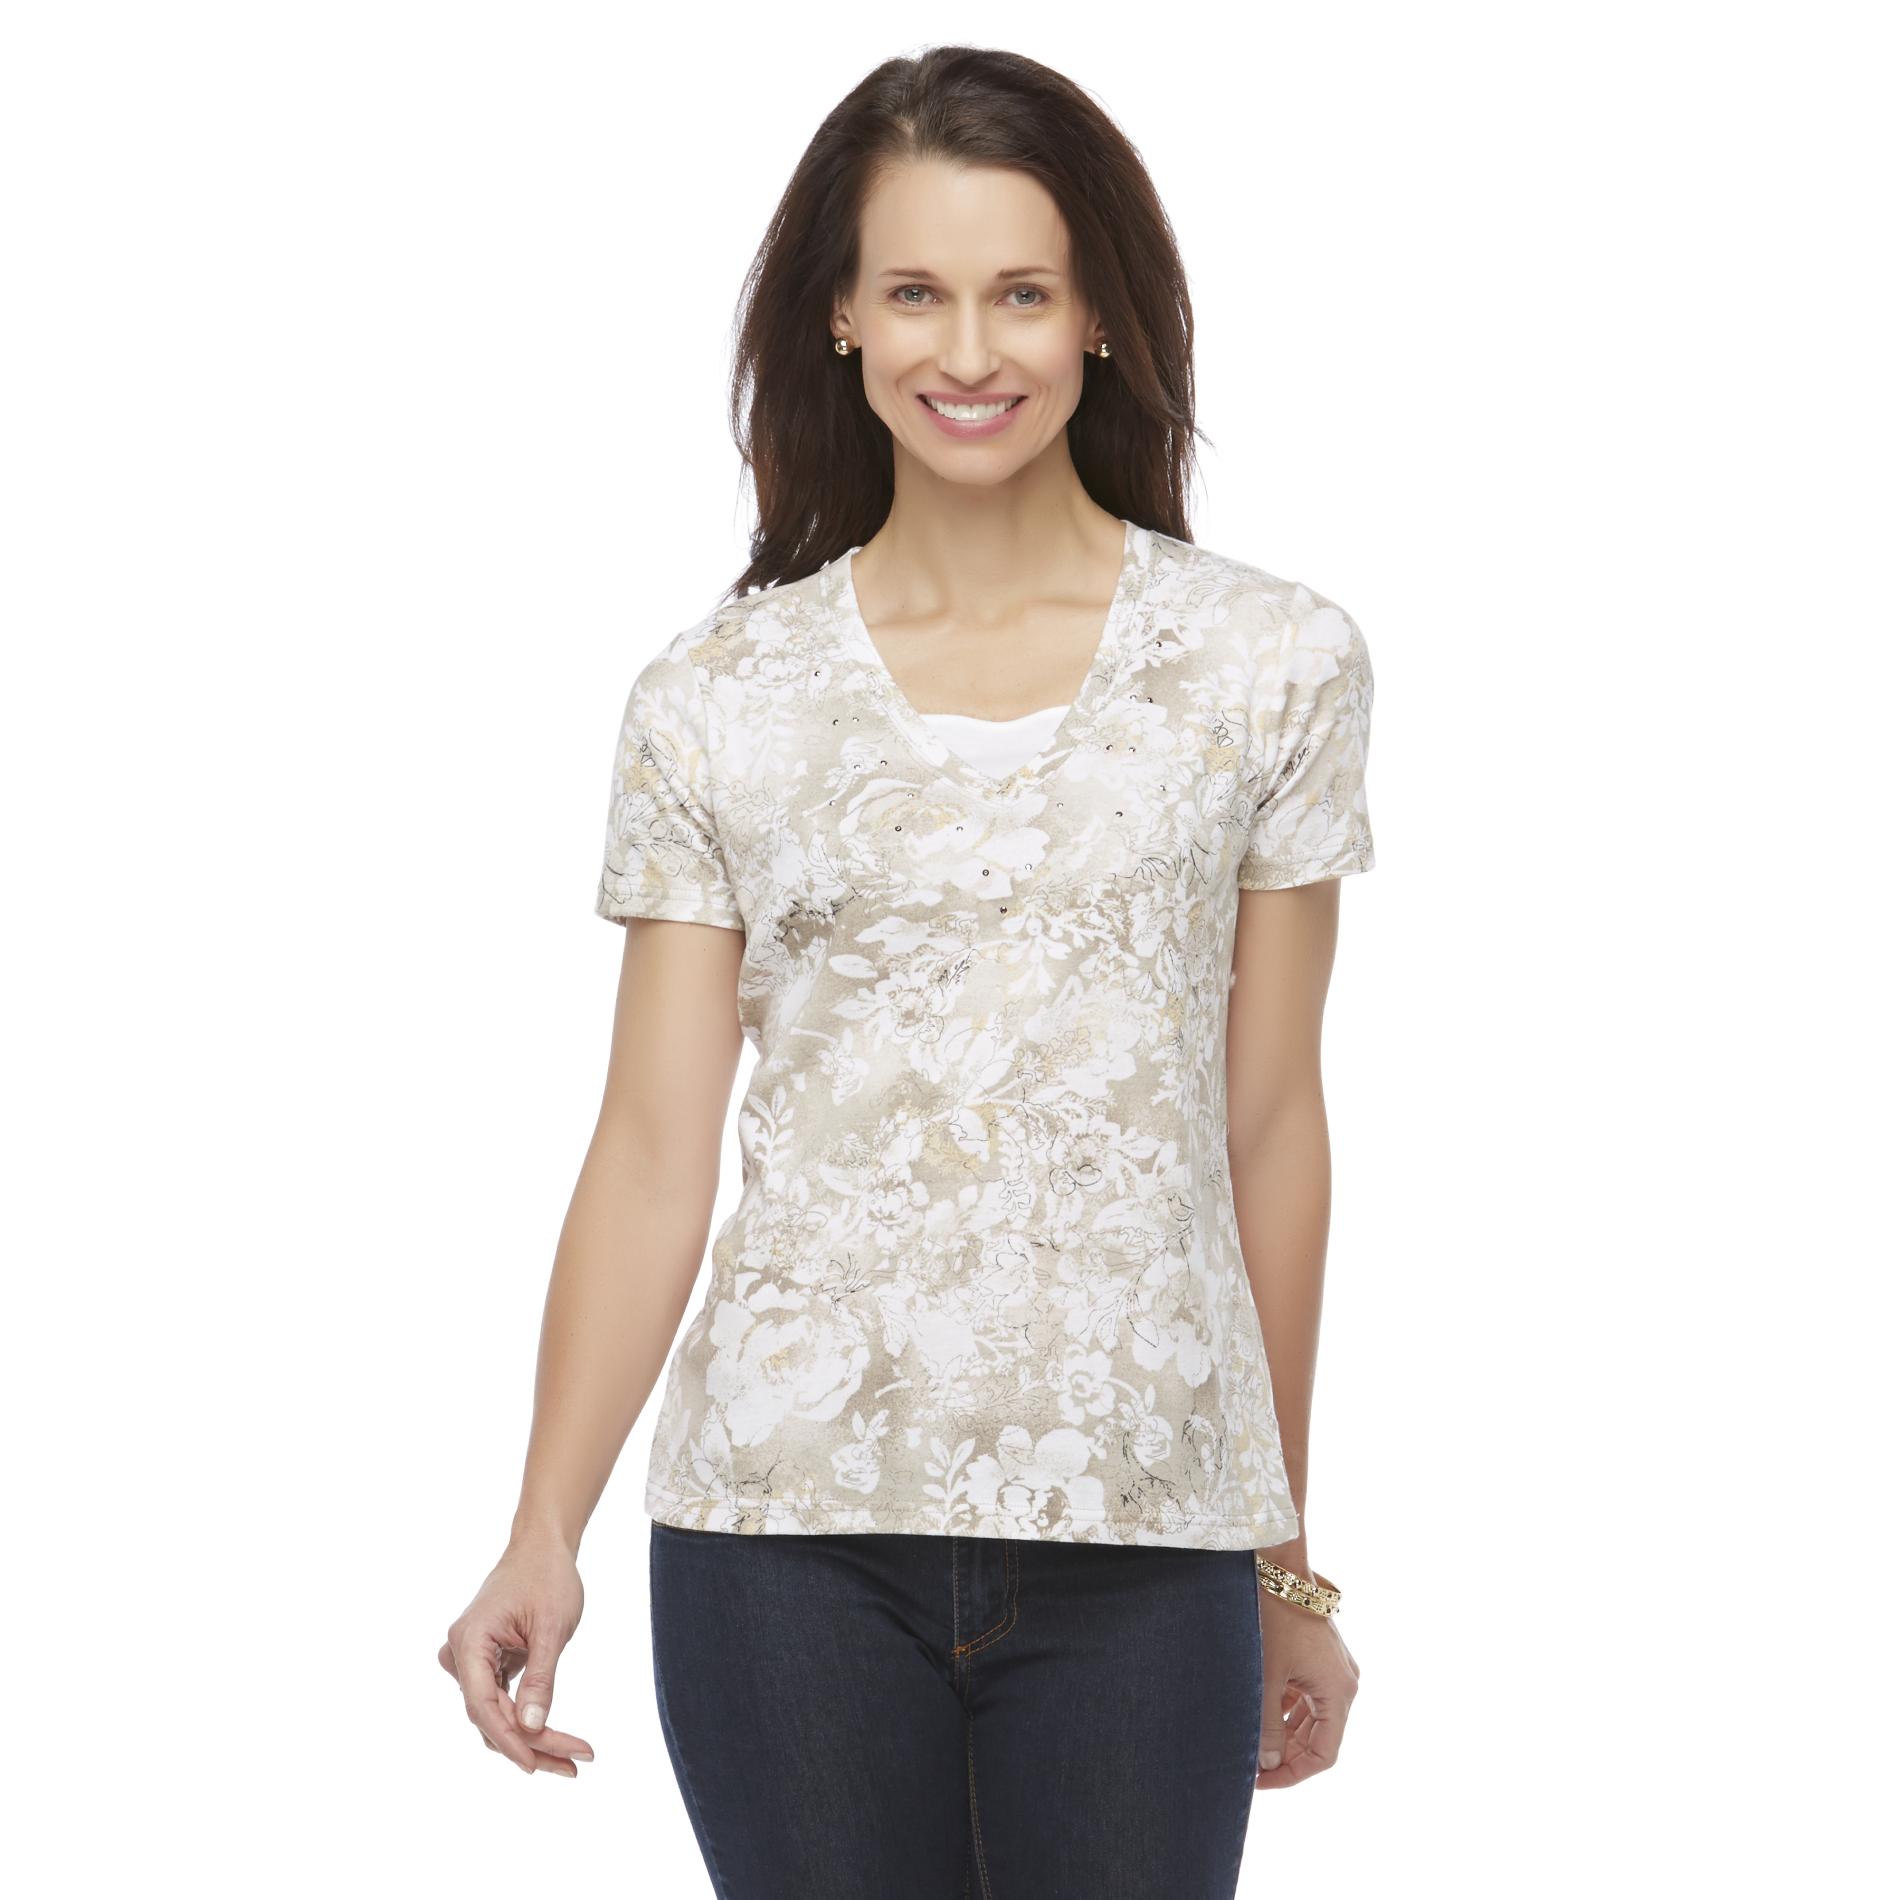 Basic Editions Women's Layered-Look Embellished Top - Floral